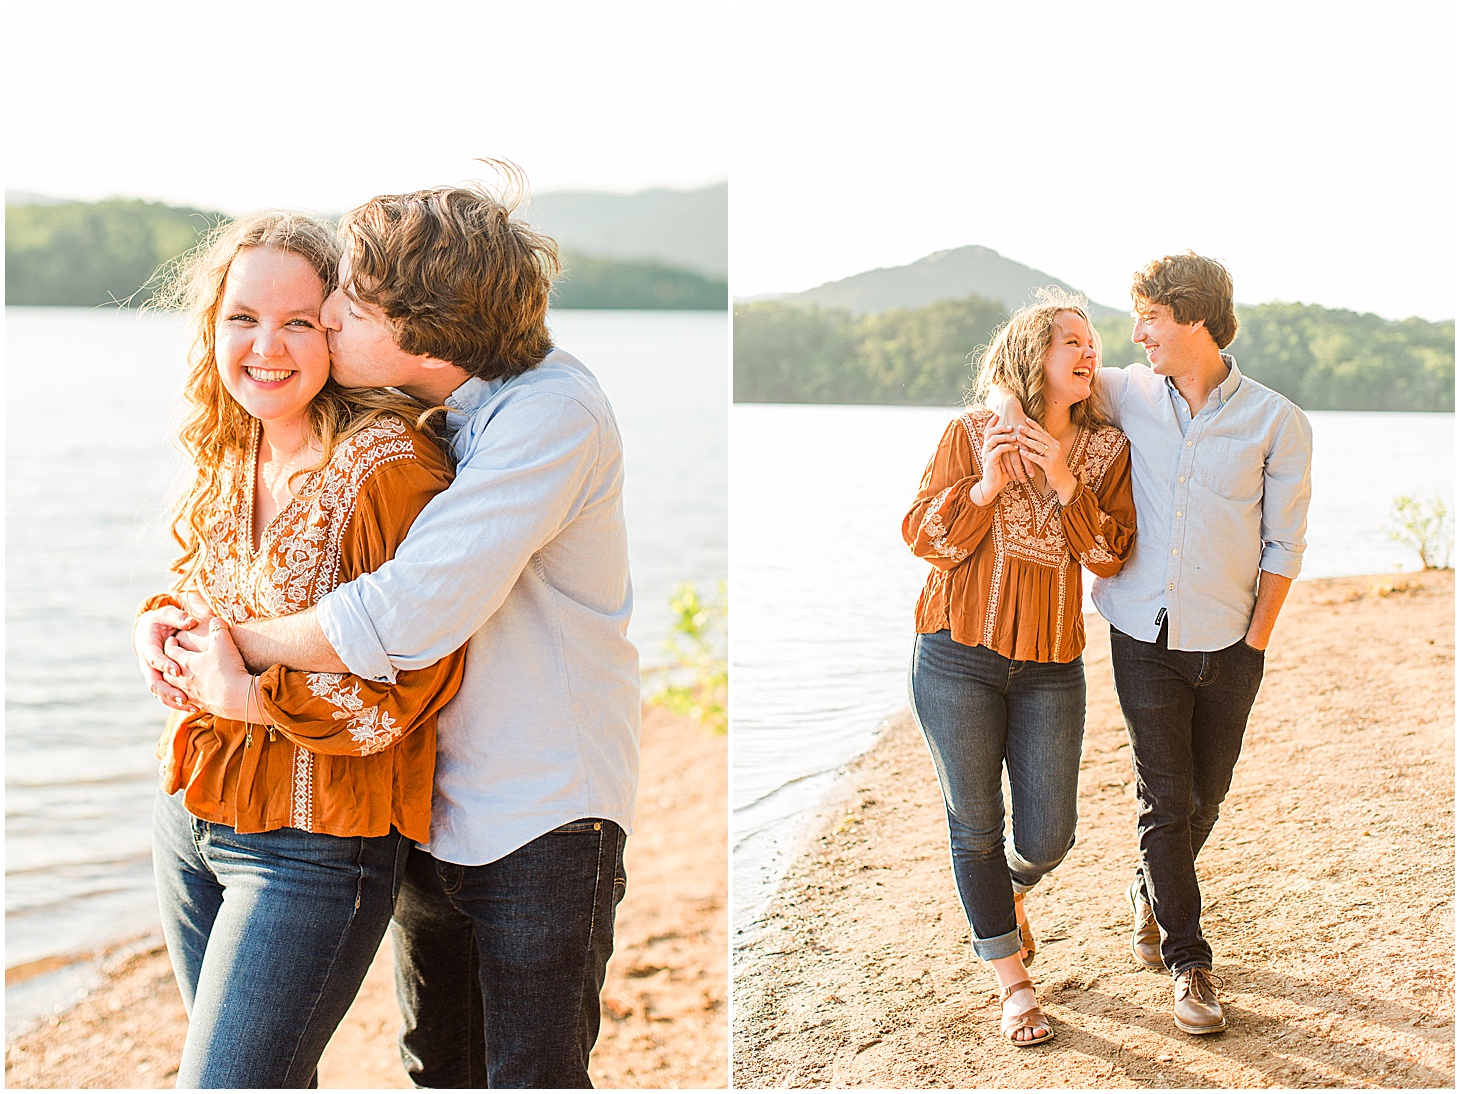 carvinscoveengagementsession_roanokeengagementsession_carvinscove_virginiawedding_virginiaweddingphotographer_vaweddingphotographer_photo_0018.jpg